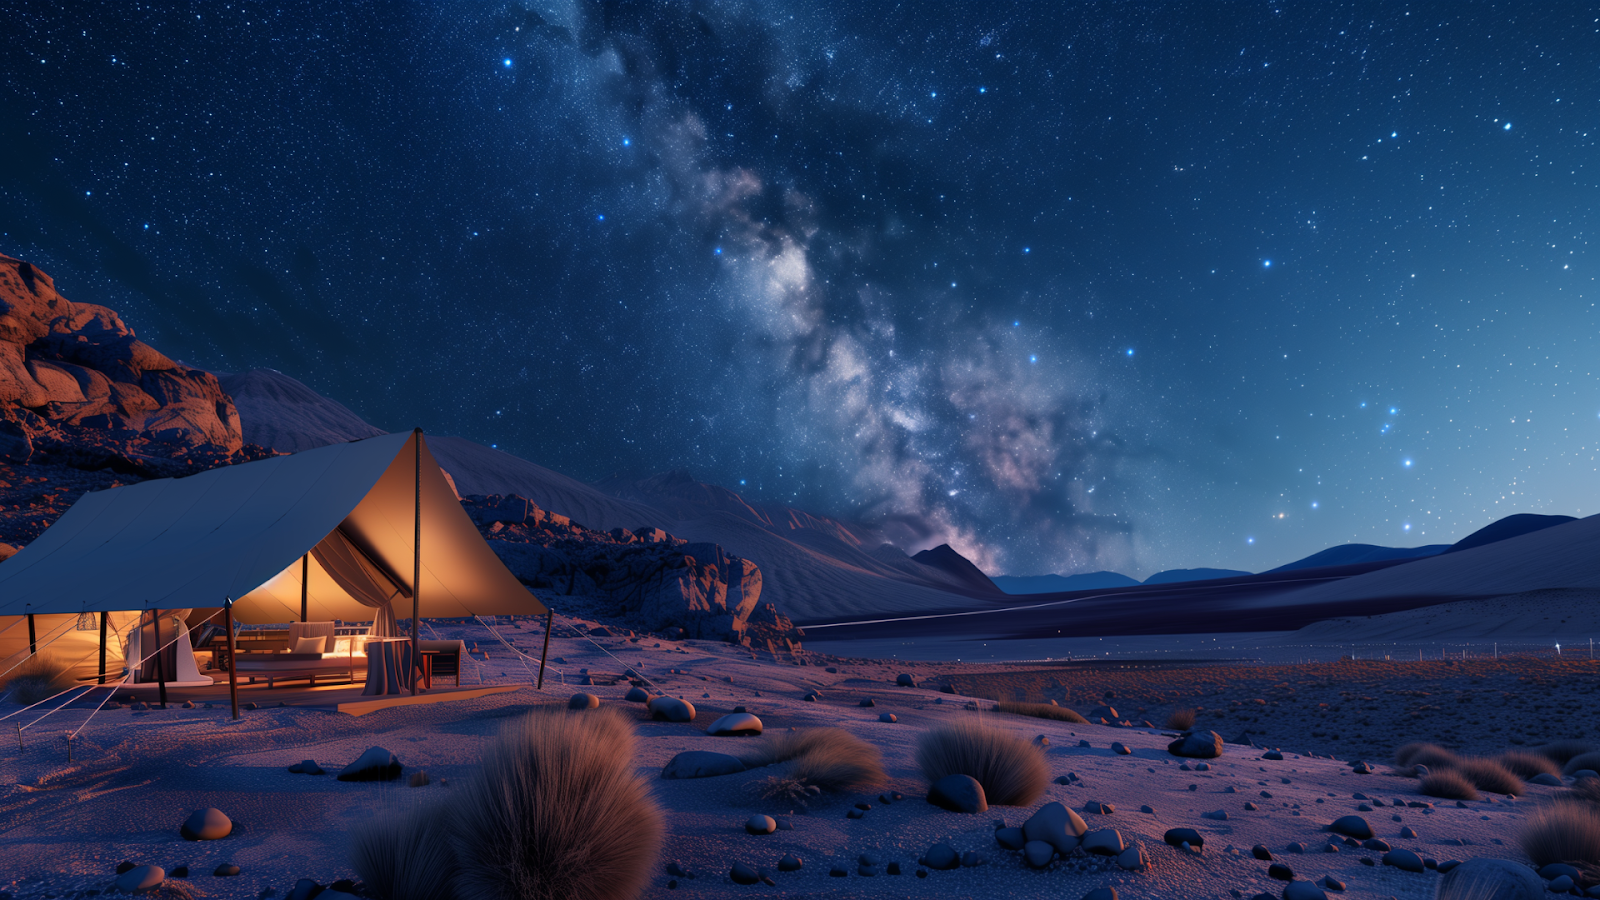 Serene twilight at Atacama Desert with a luxury tent and a couple stargazing at the Milky Way.